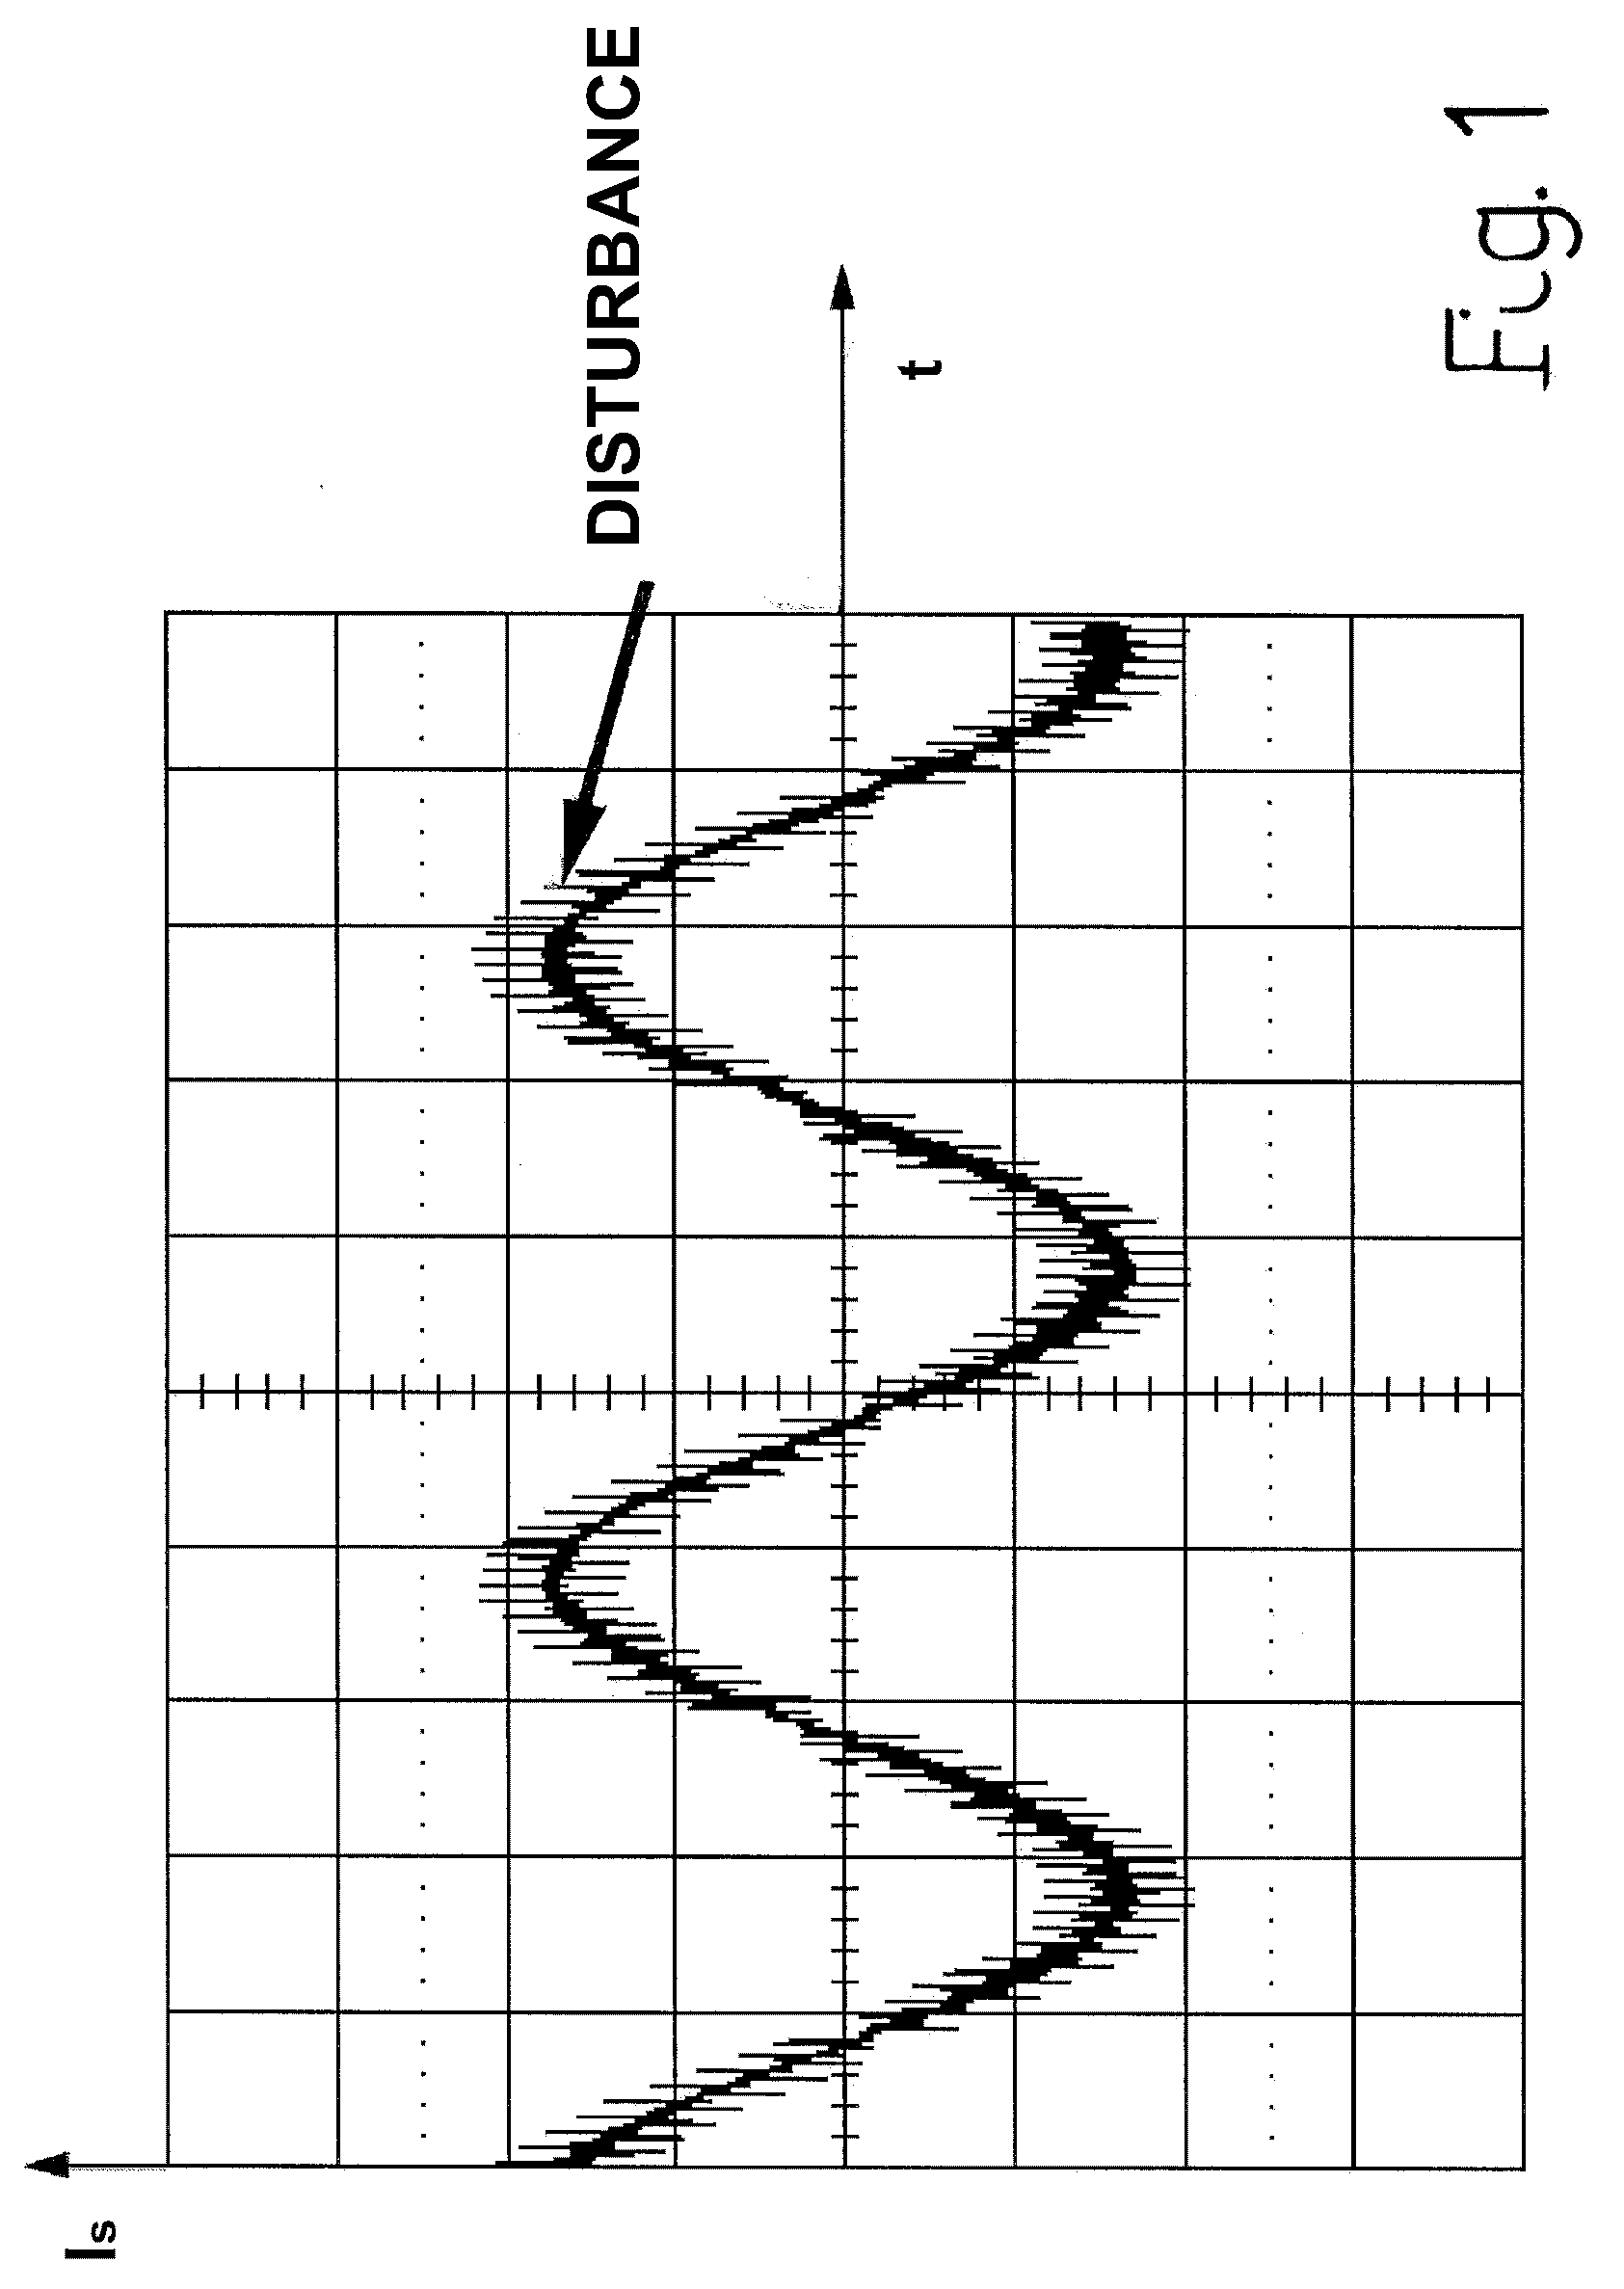 Device for Powering Electric or Electronic Devices Operatively Associated with a Circuit Breaker